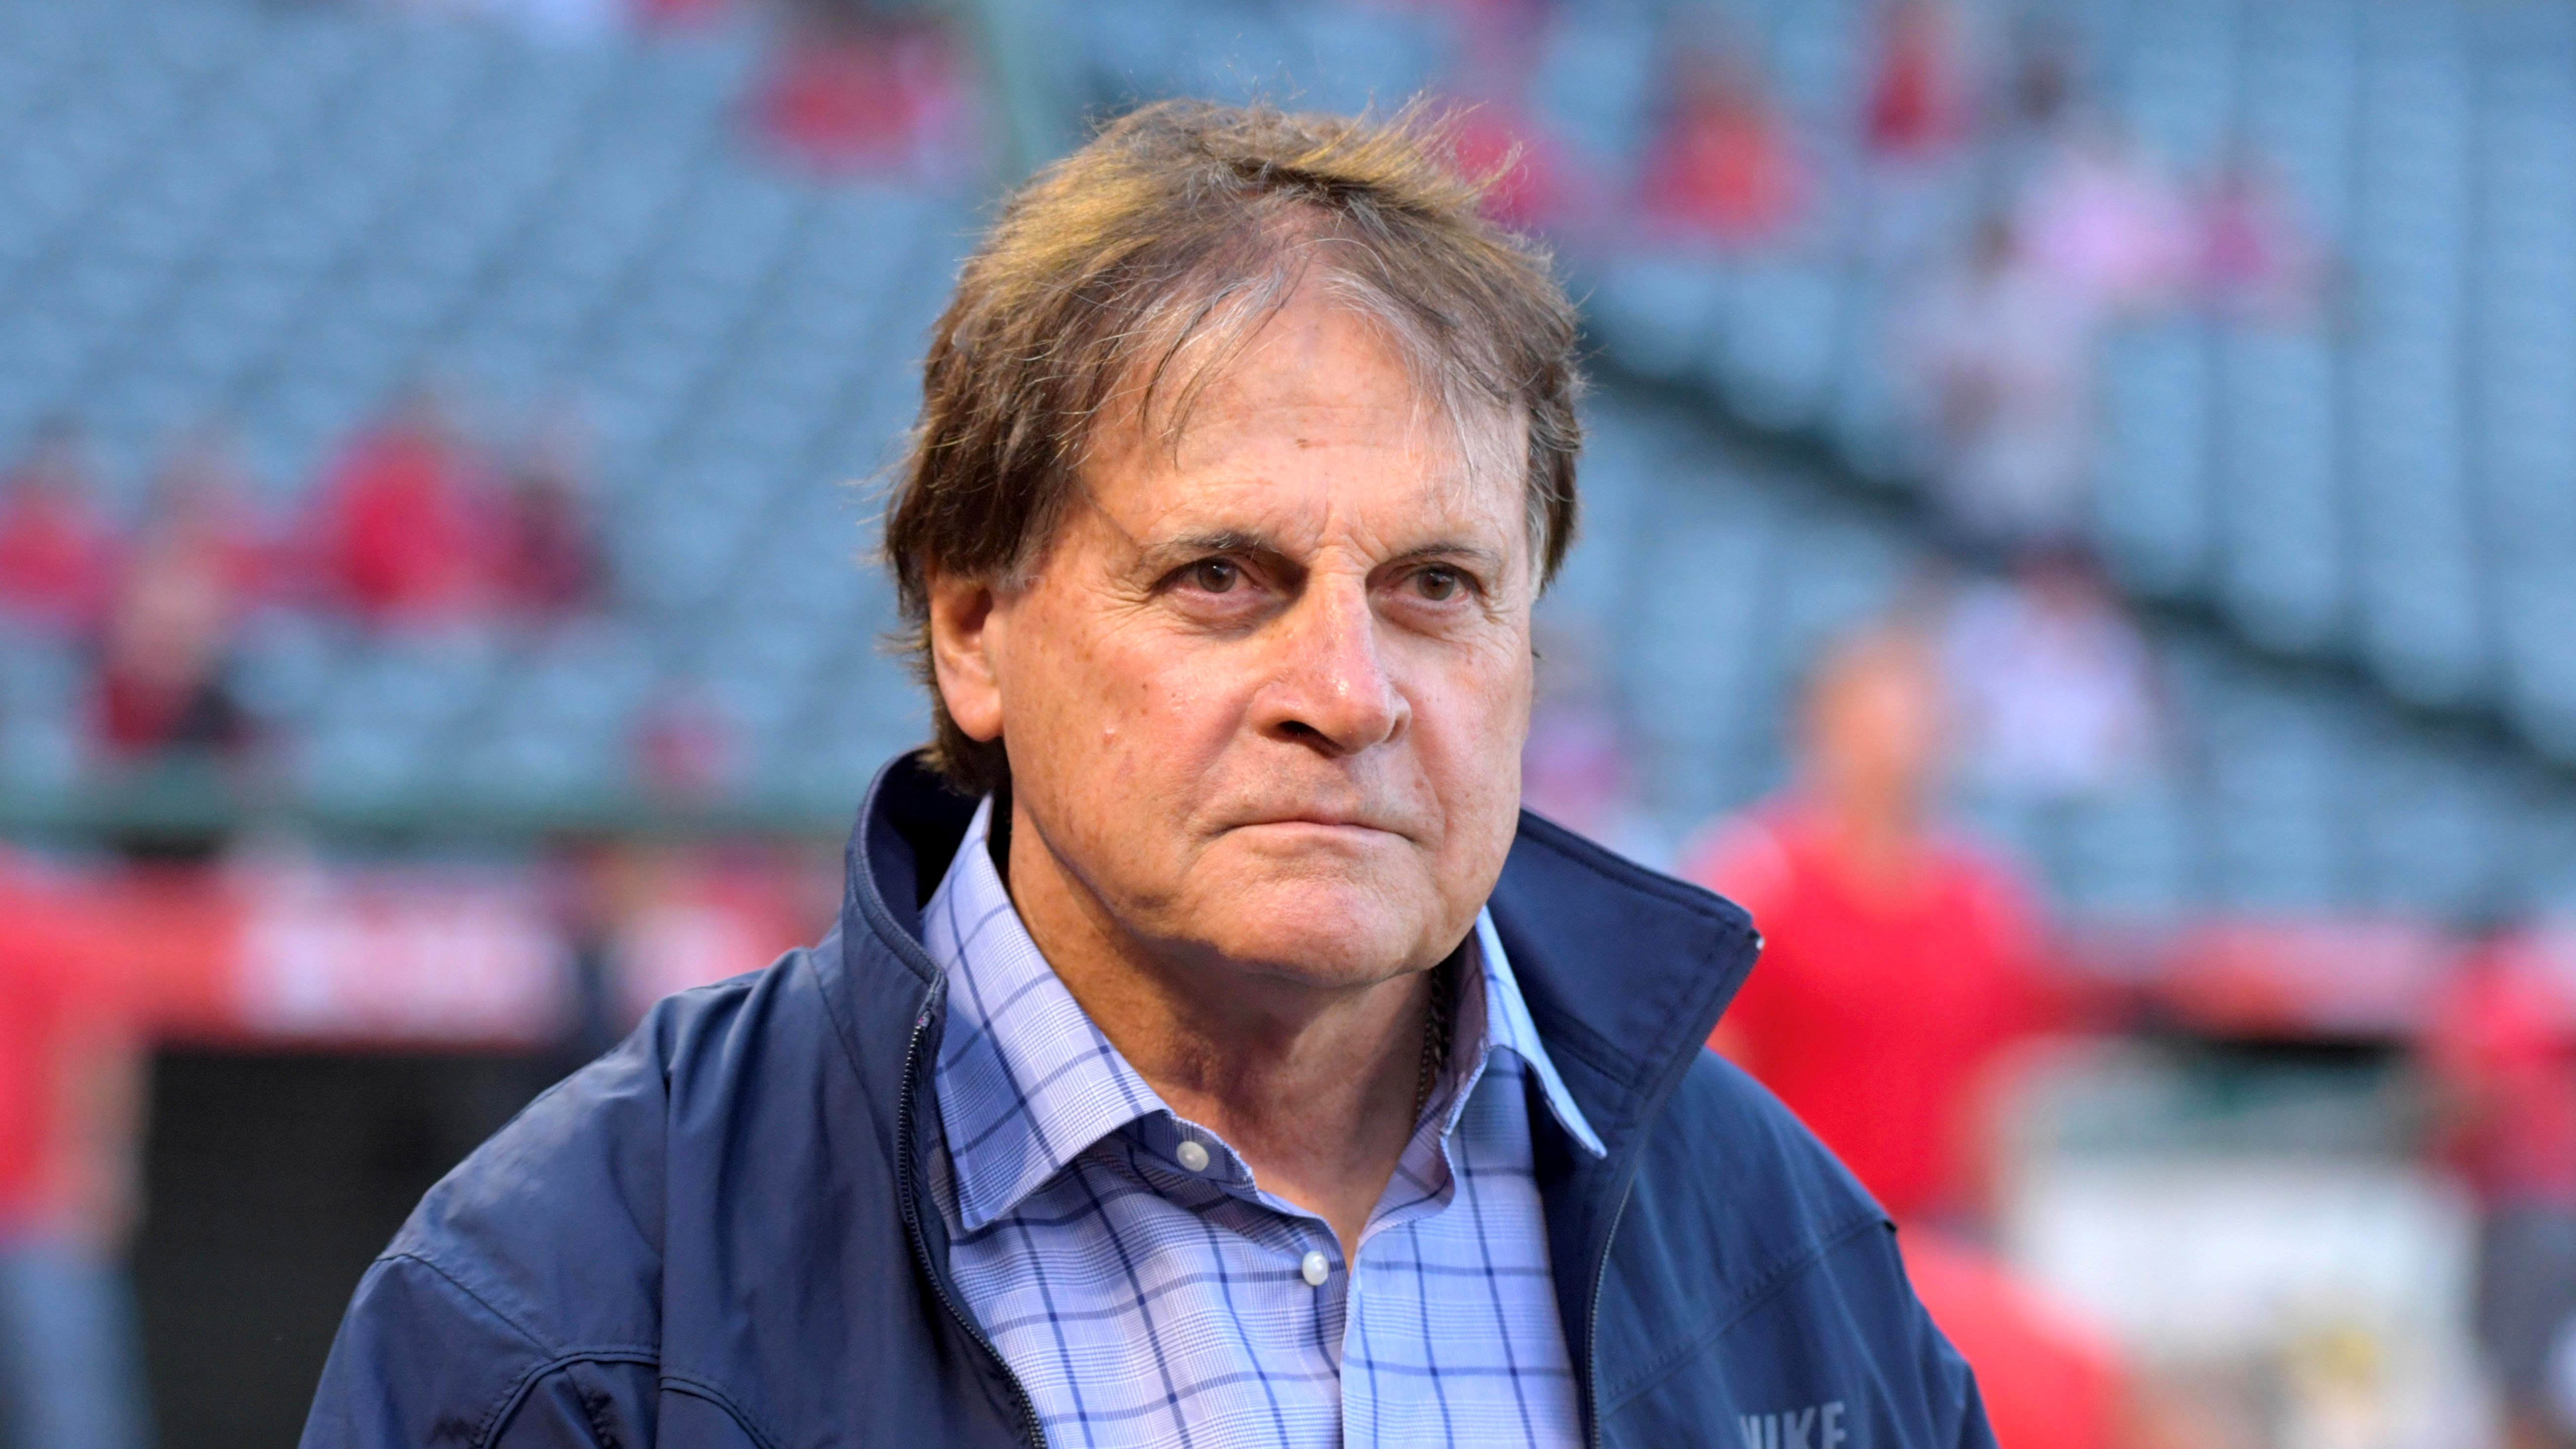 Tony La Russa's timeline from White Sox manager in 1979 to new era